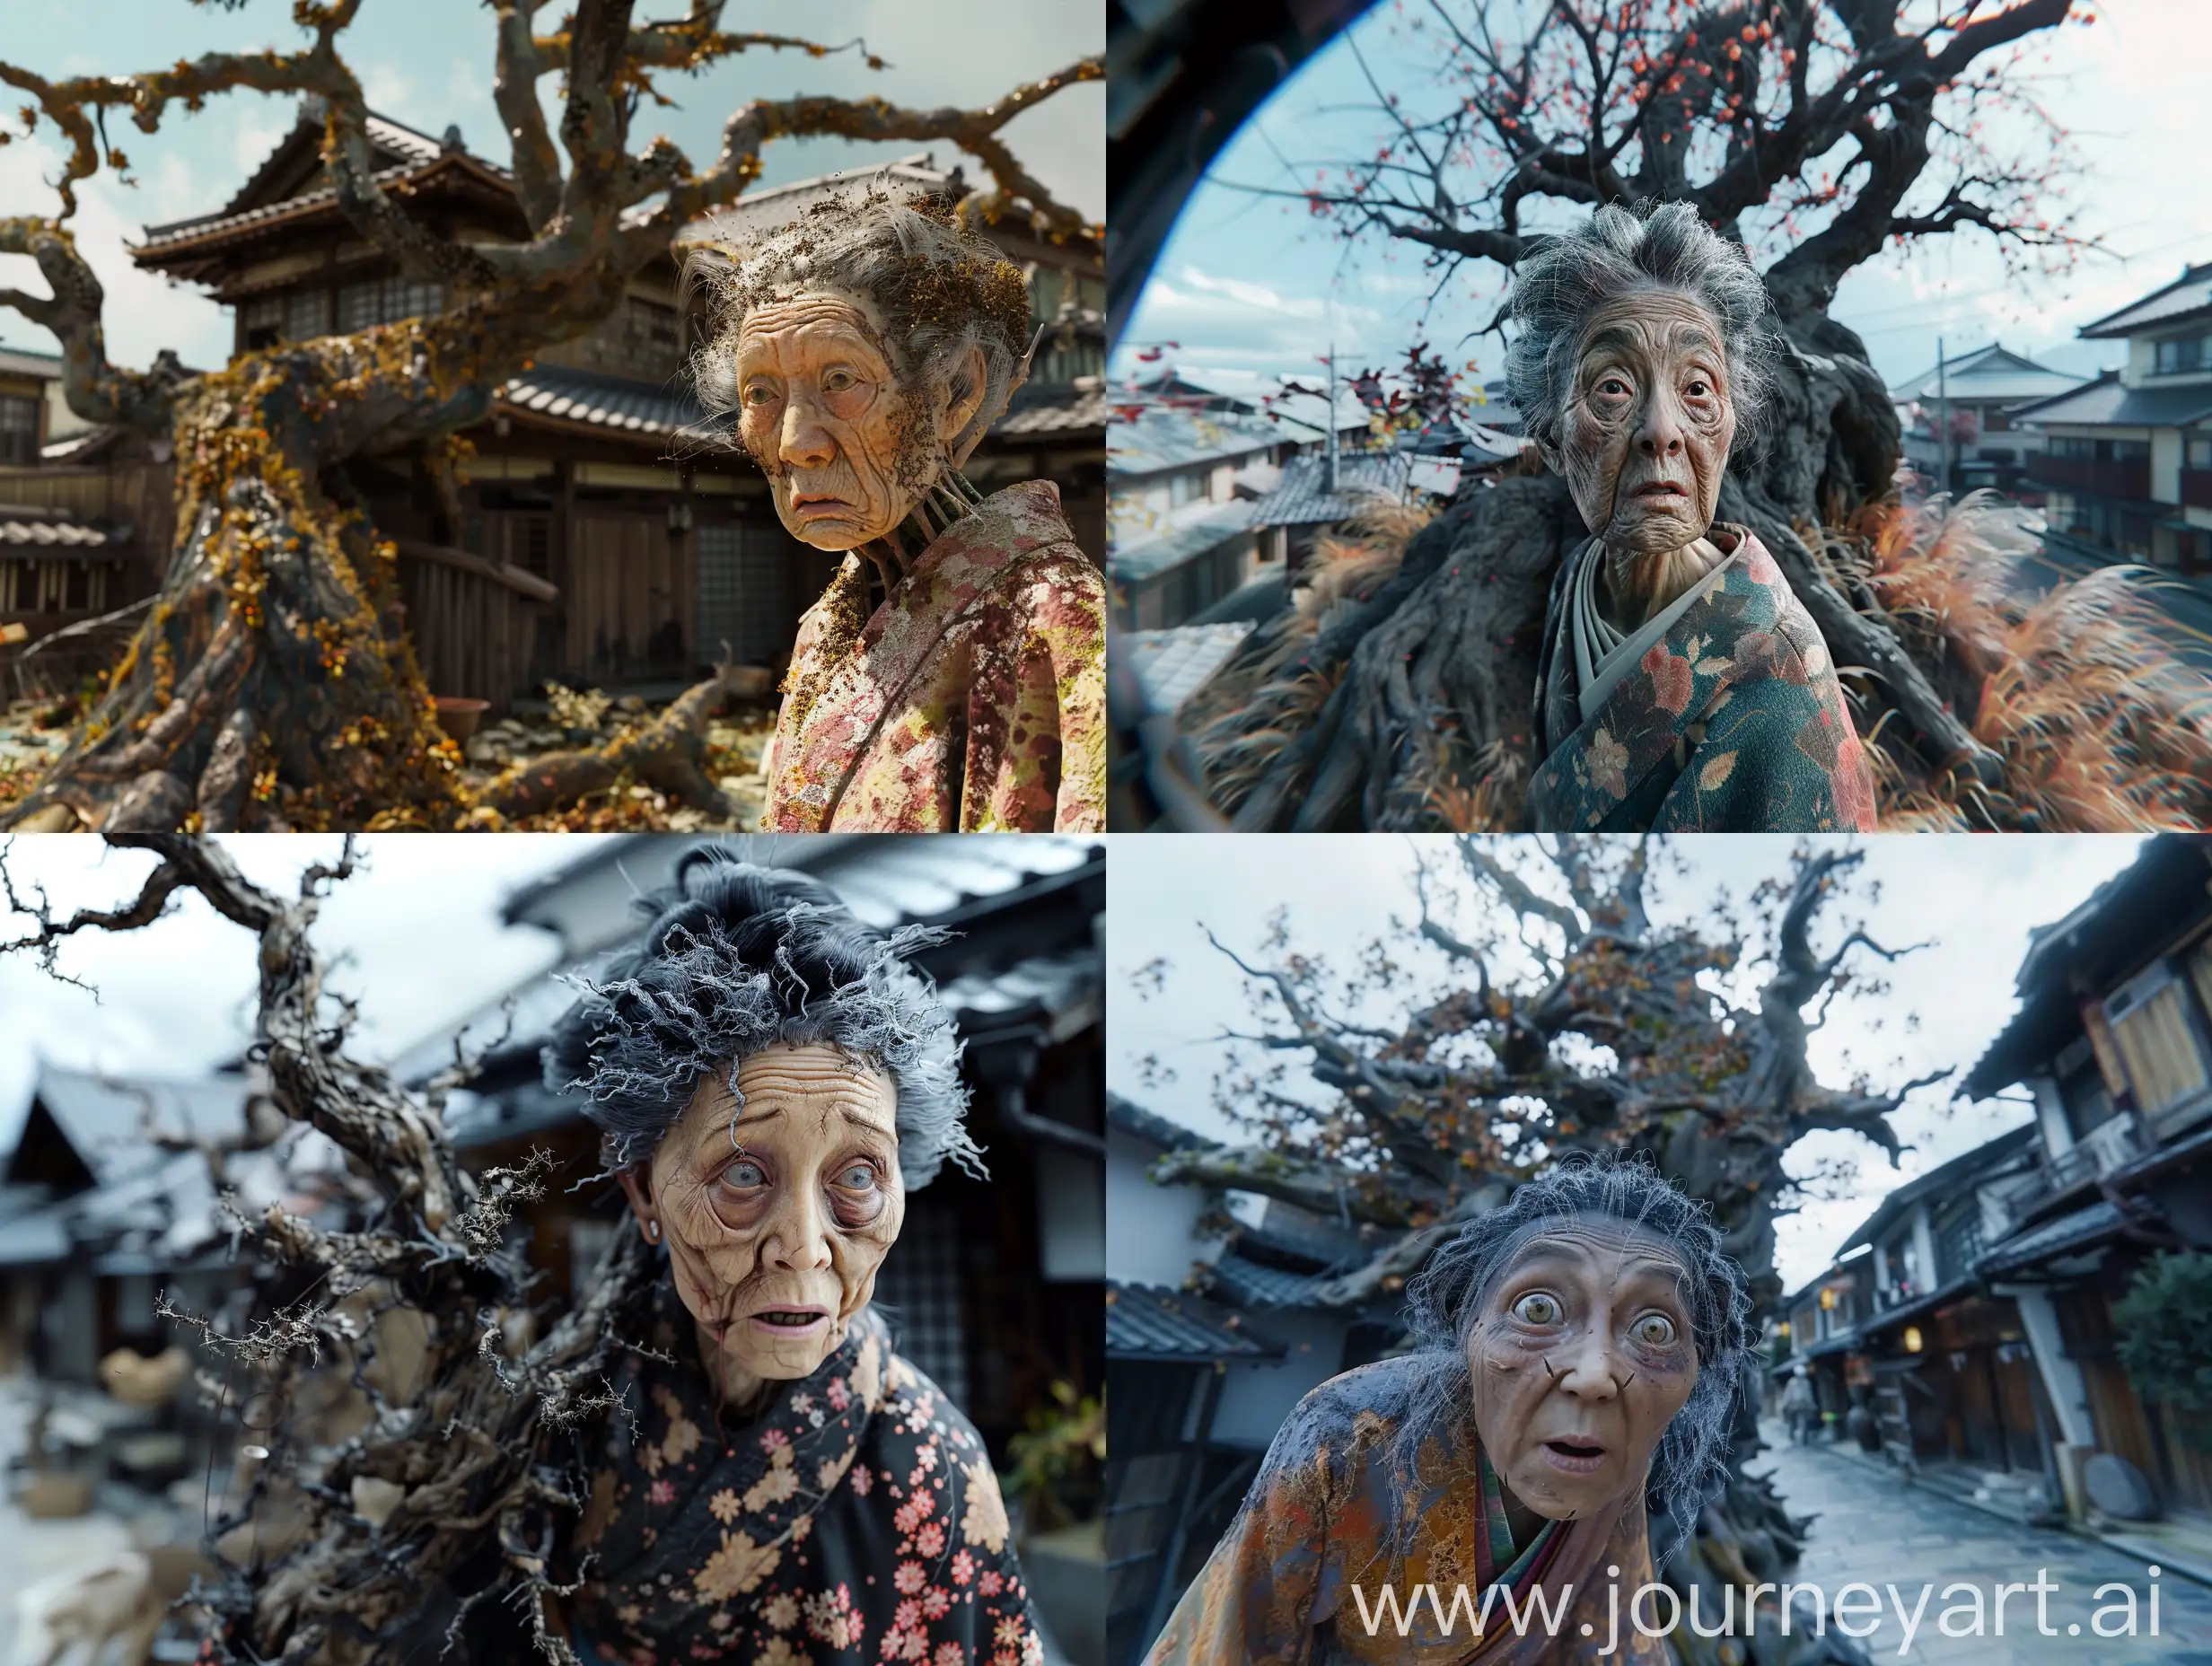 Cinematic-Realism-Panoramic-Shot-of-Japanese-Yokai-Old-Man-and-Withered-Tree-in-Strange-Ghost-Brides-World